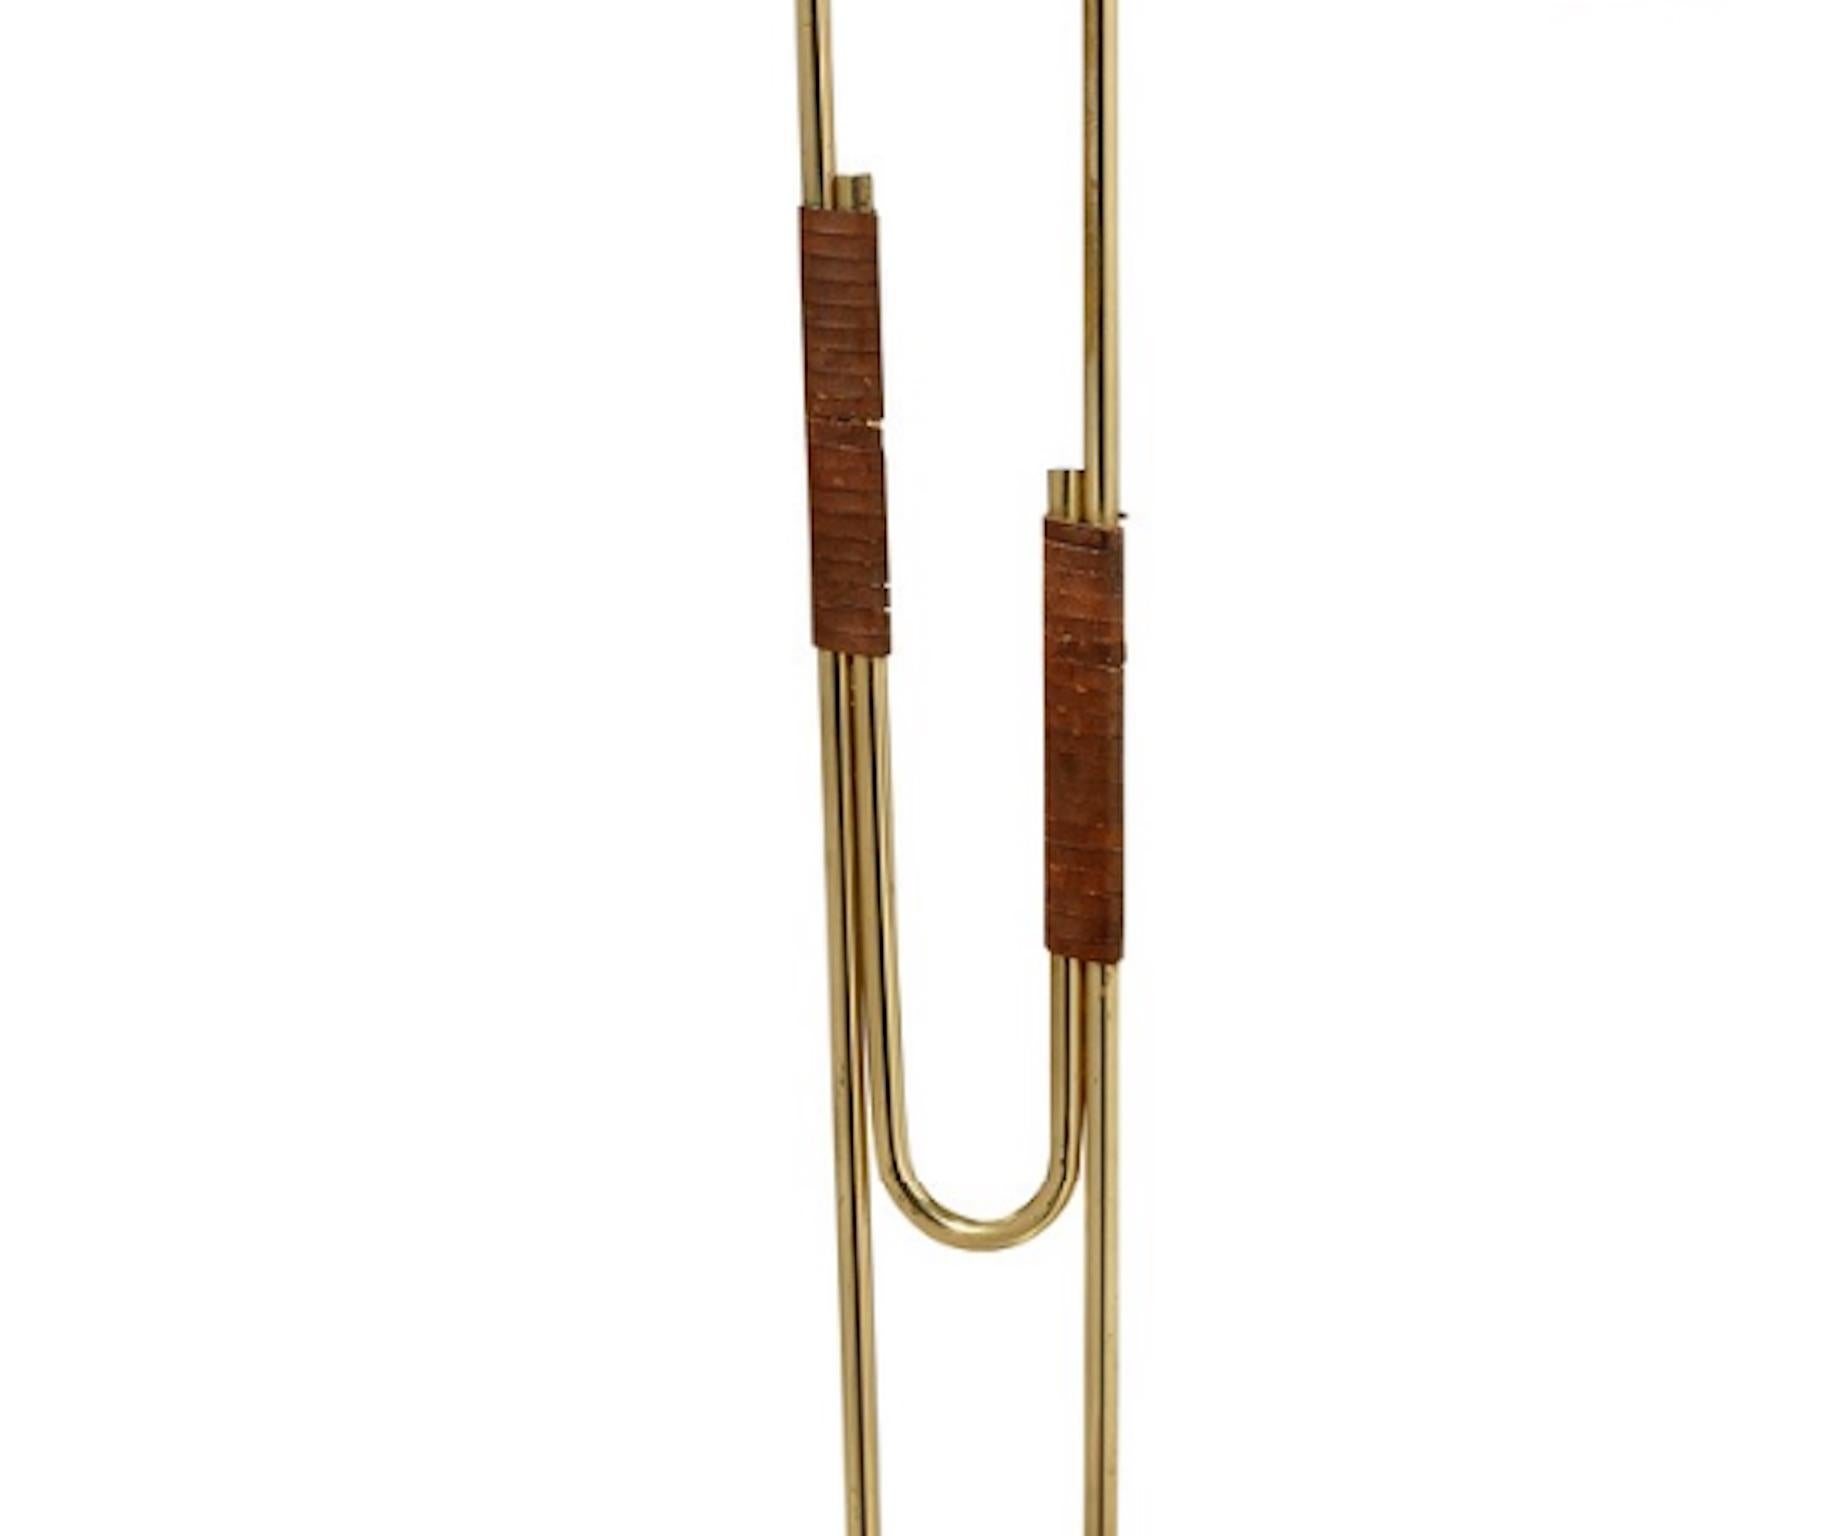 A mid-20th century floor lamp model EN 31 for Itsu, Finland

Polished brass. Adjustable stems with leather windings. Manufacturer stamp.